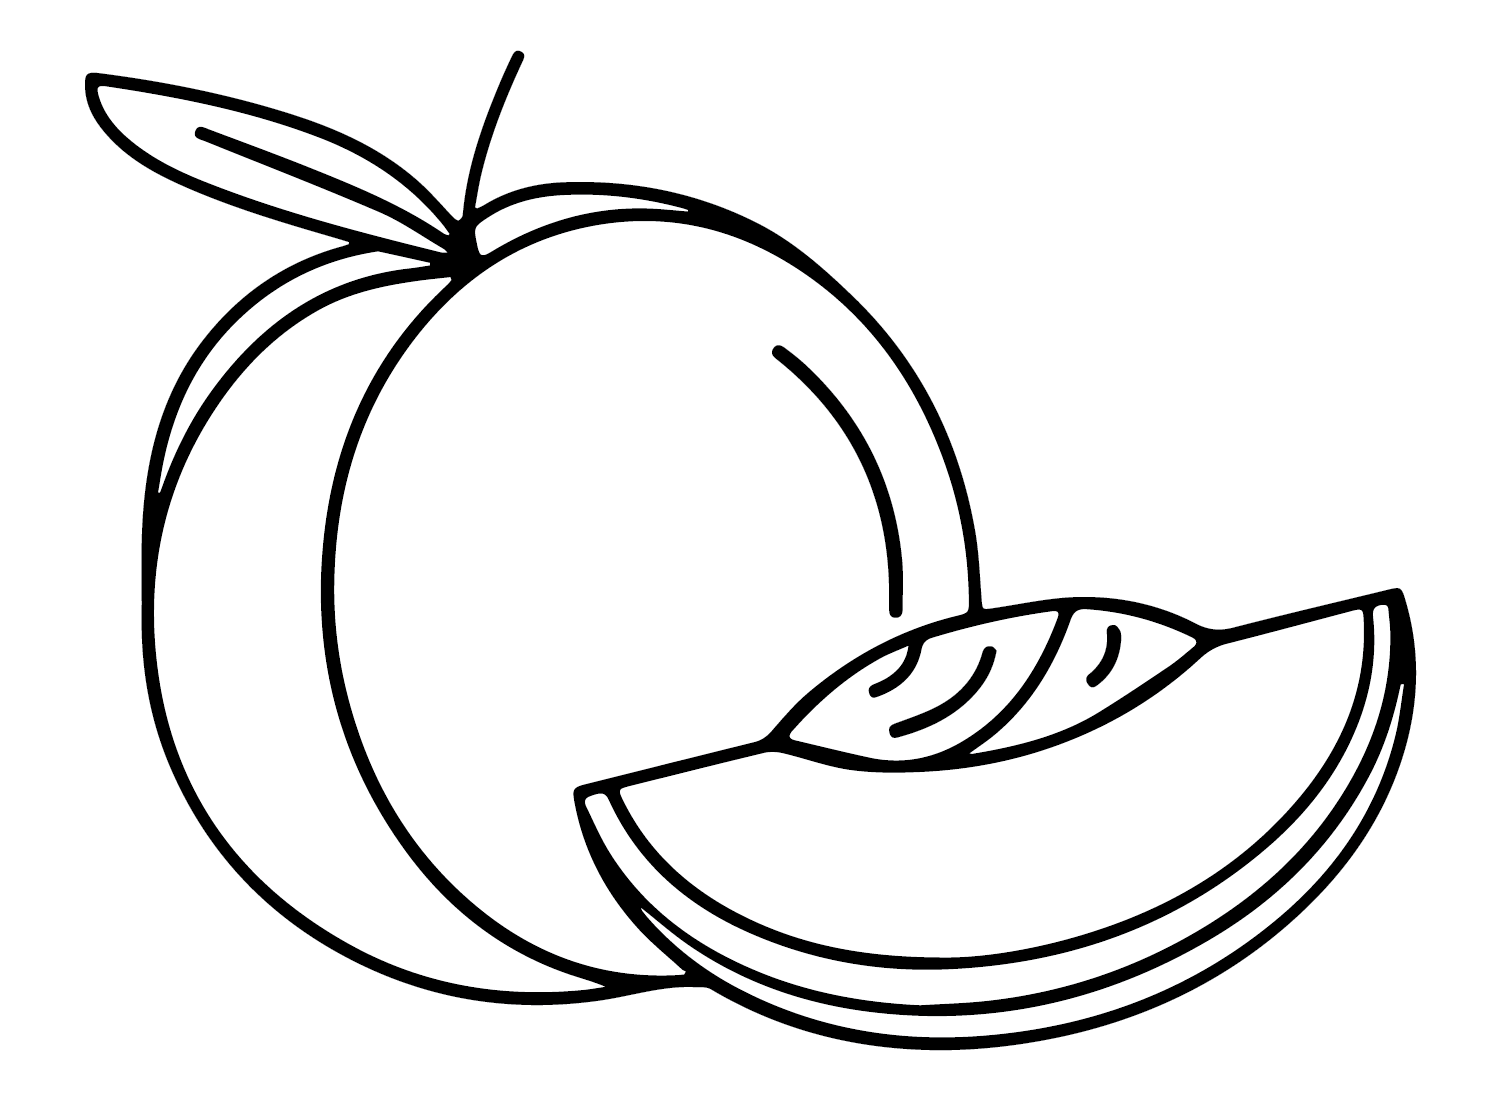 Nectarine Fruit Coloring Page